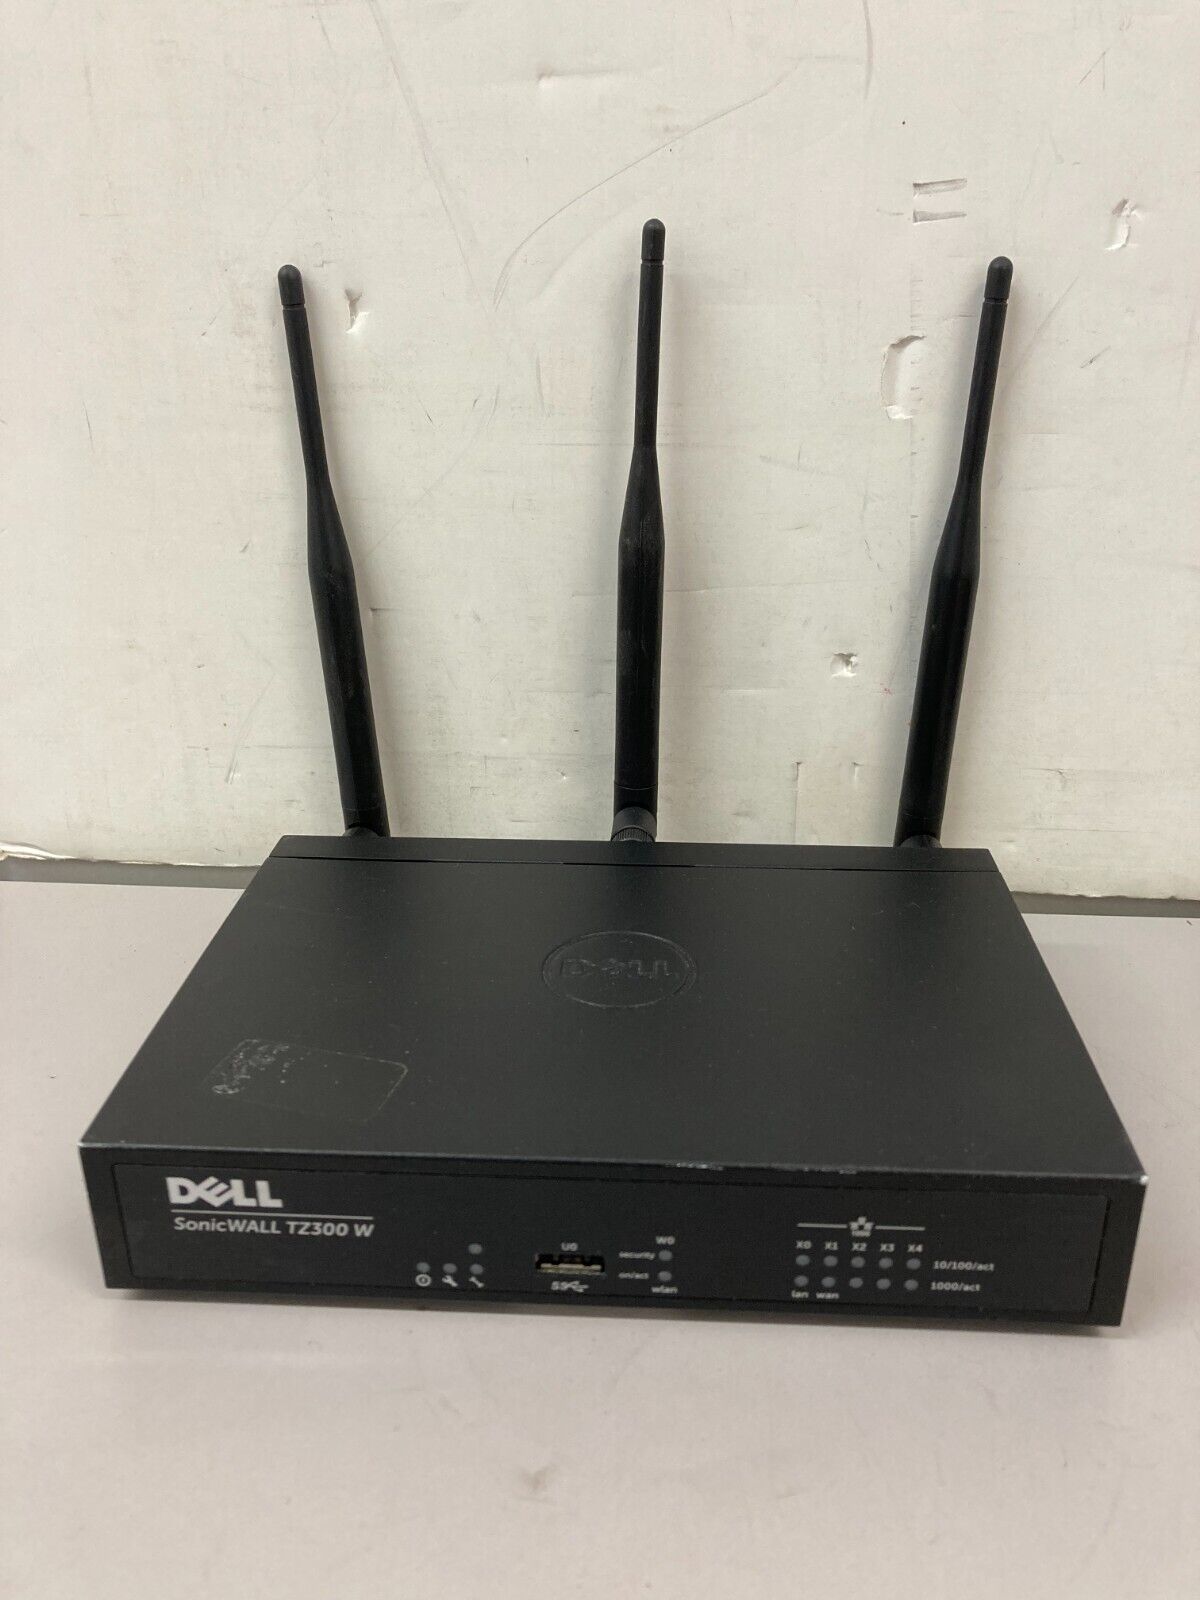 Primary image for Dell Sonicwall TZ300 W Wireless Firewall Appliance